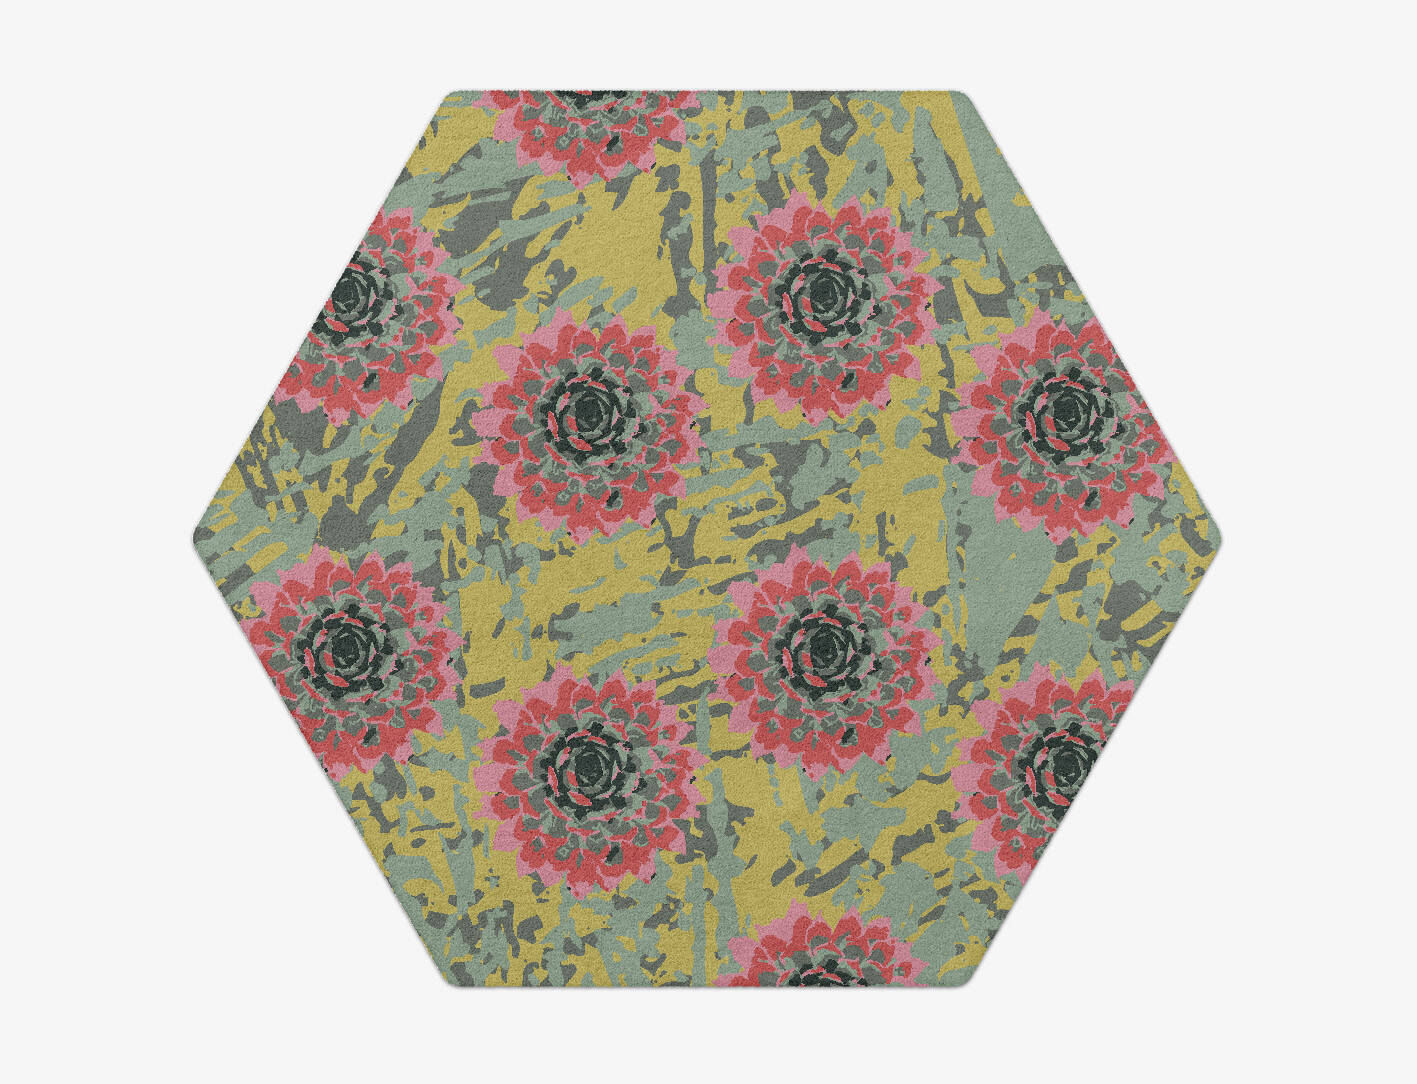 Water Lily Floral Hexagon Hand Tufted Pure Wool Custom Rug by Rug Artisan